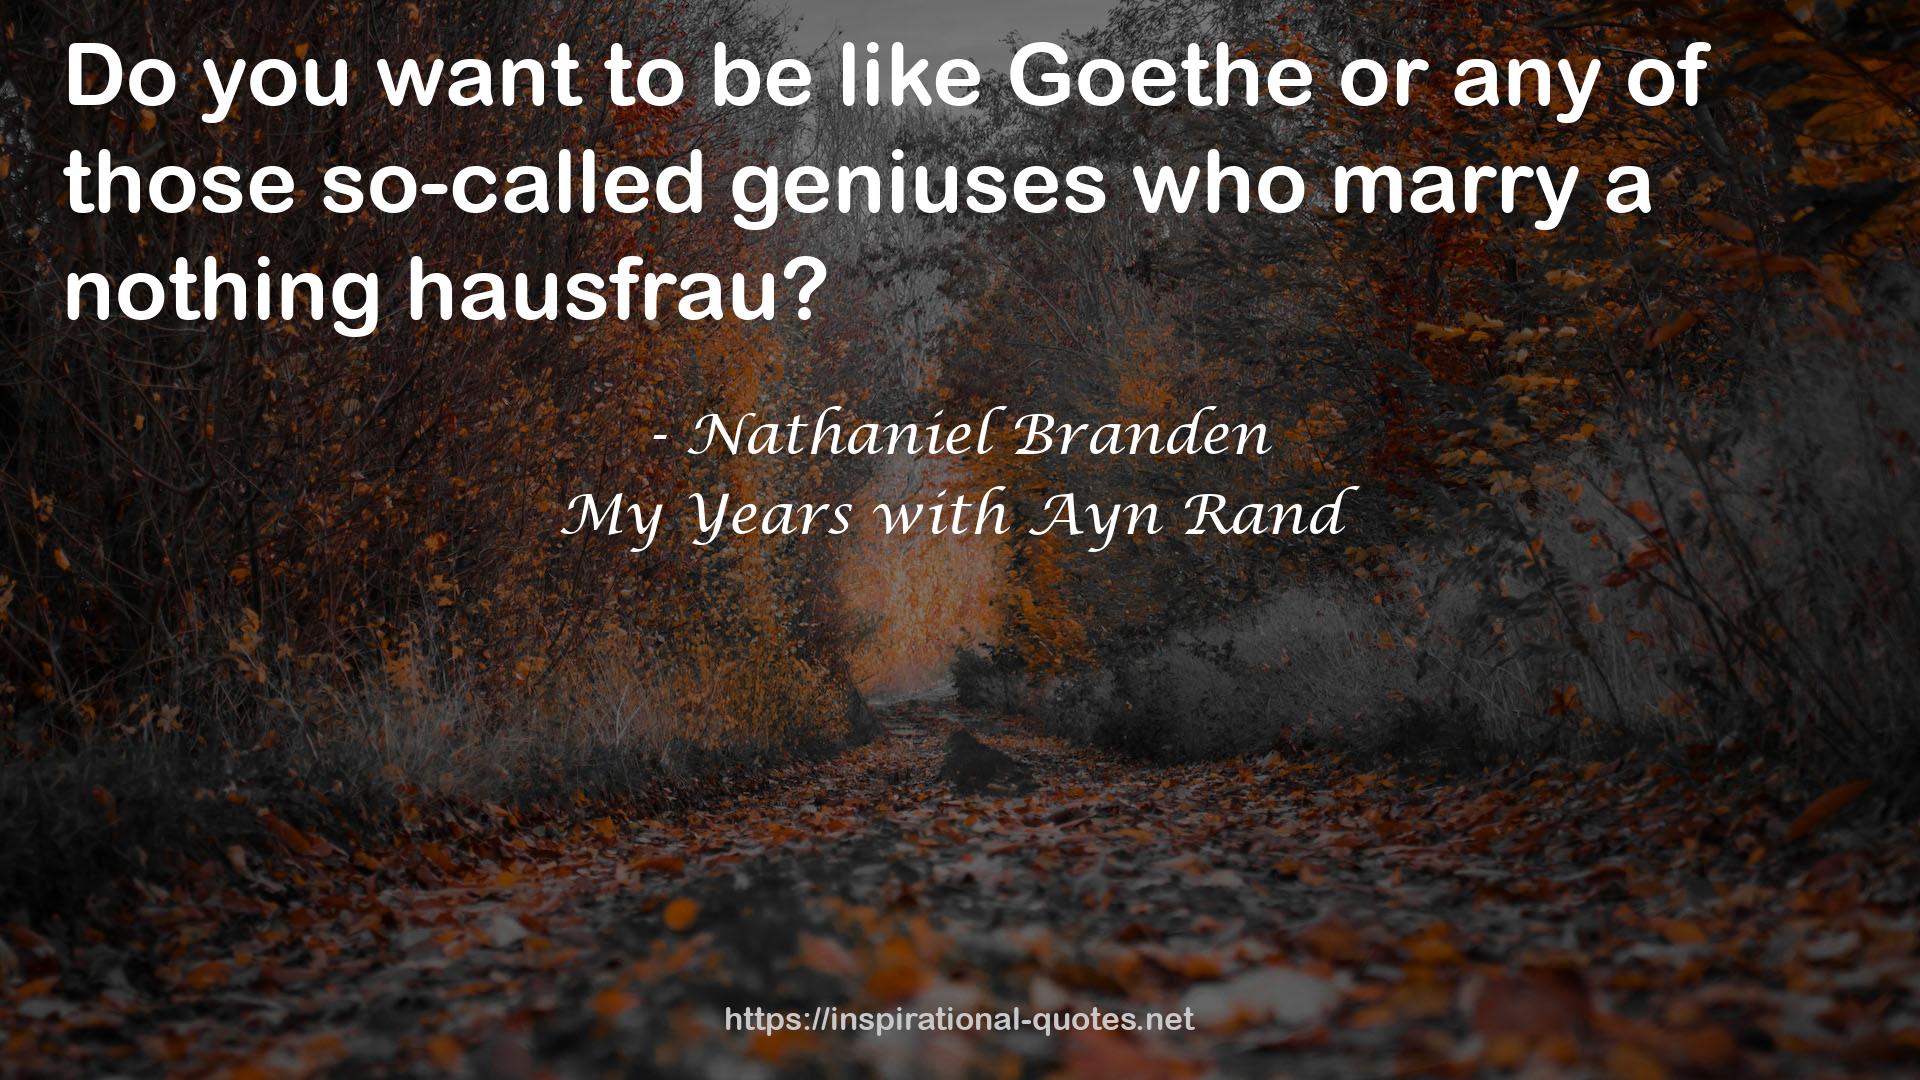 My Years with Ayn Rand QUOTES